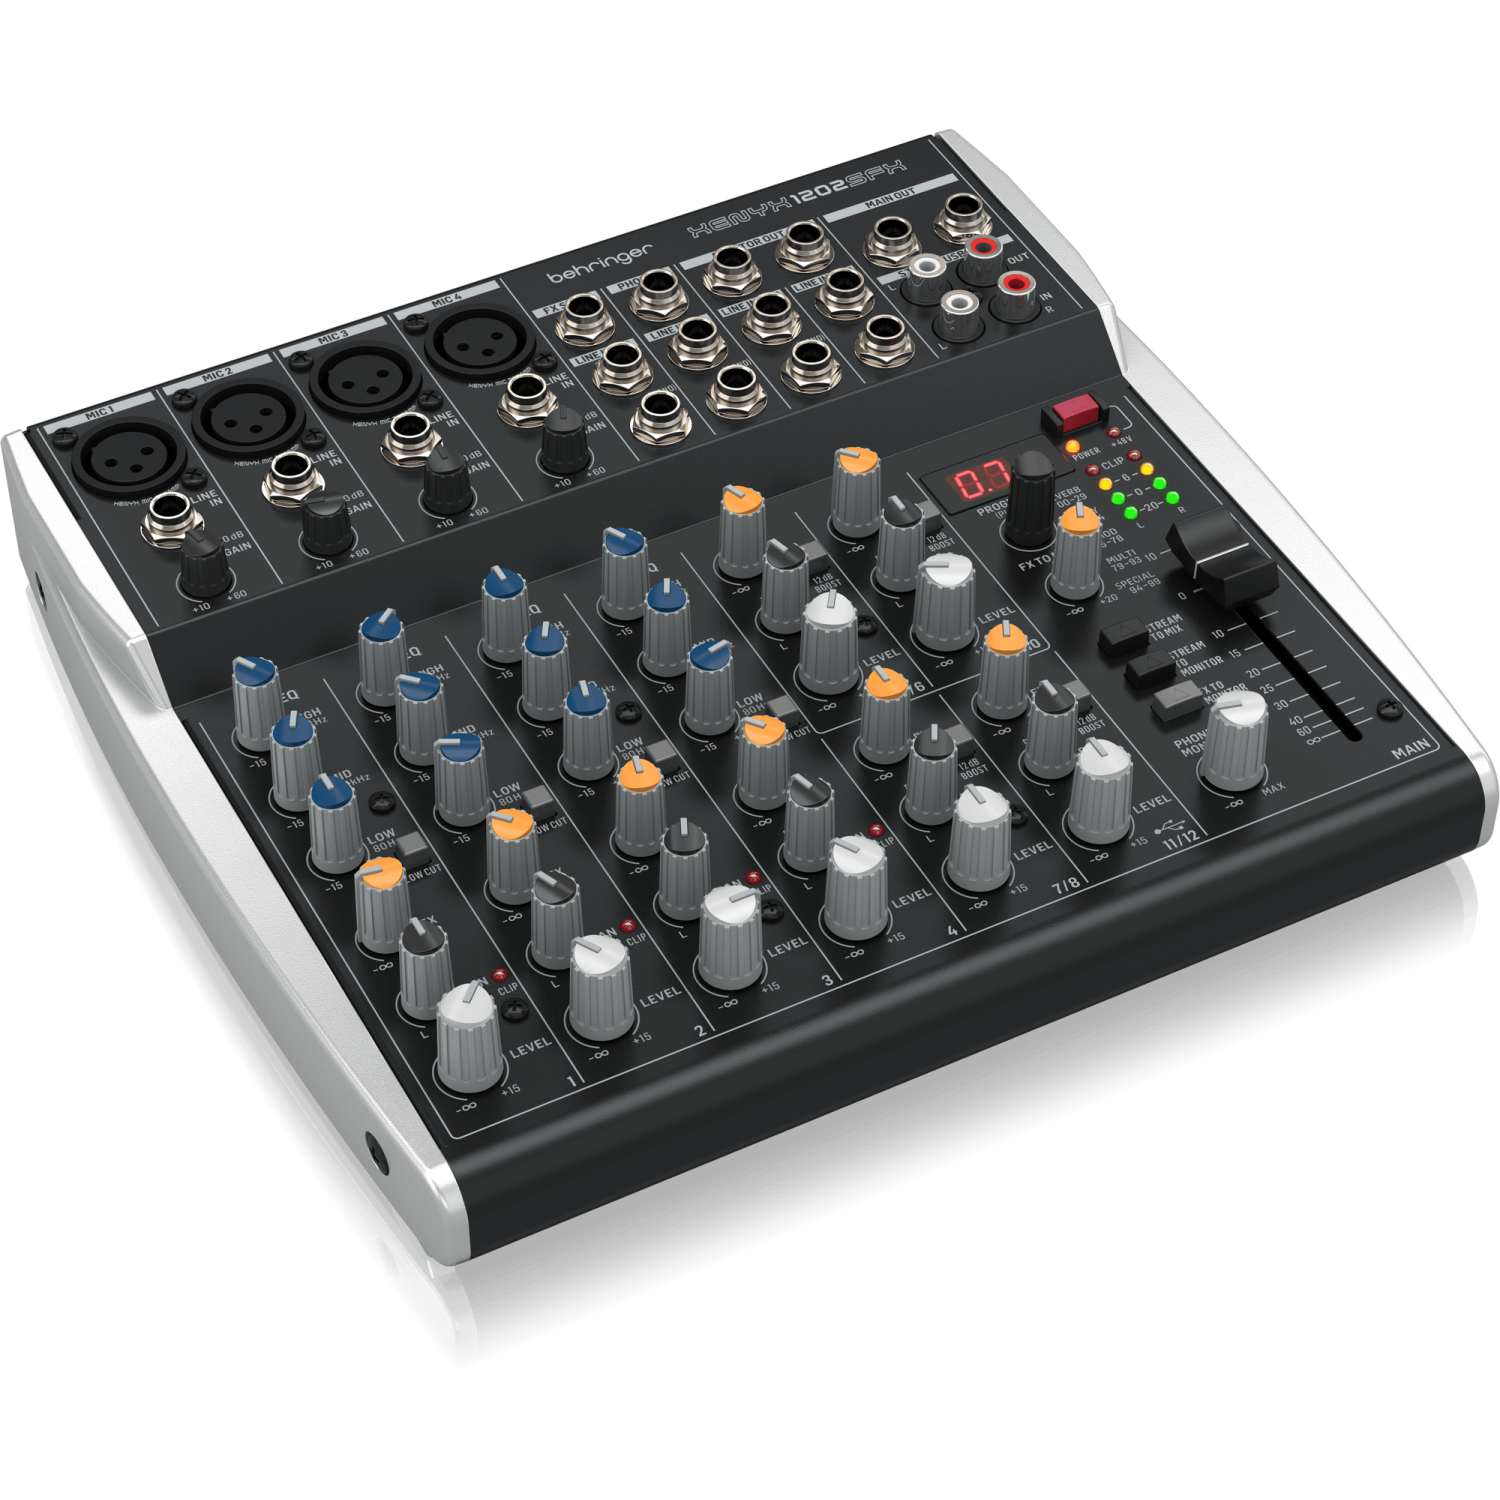 Behringer XENYX 1202SFX - mikser analogowy